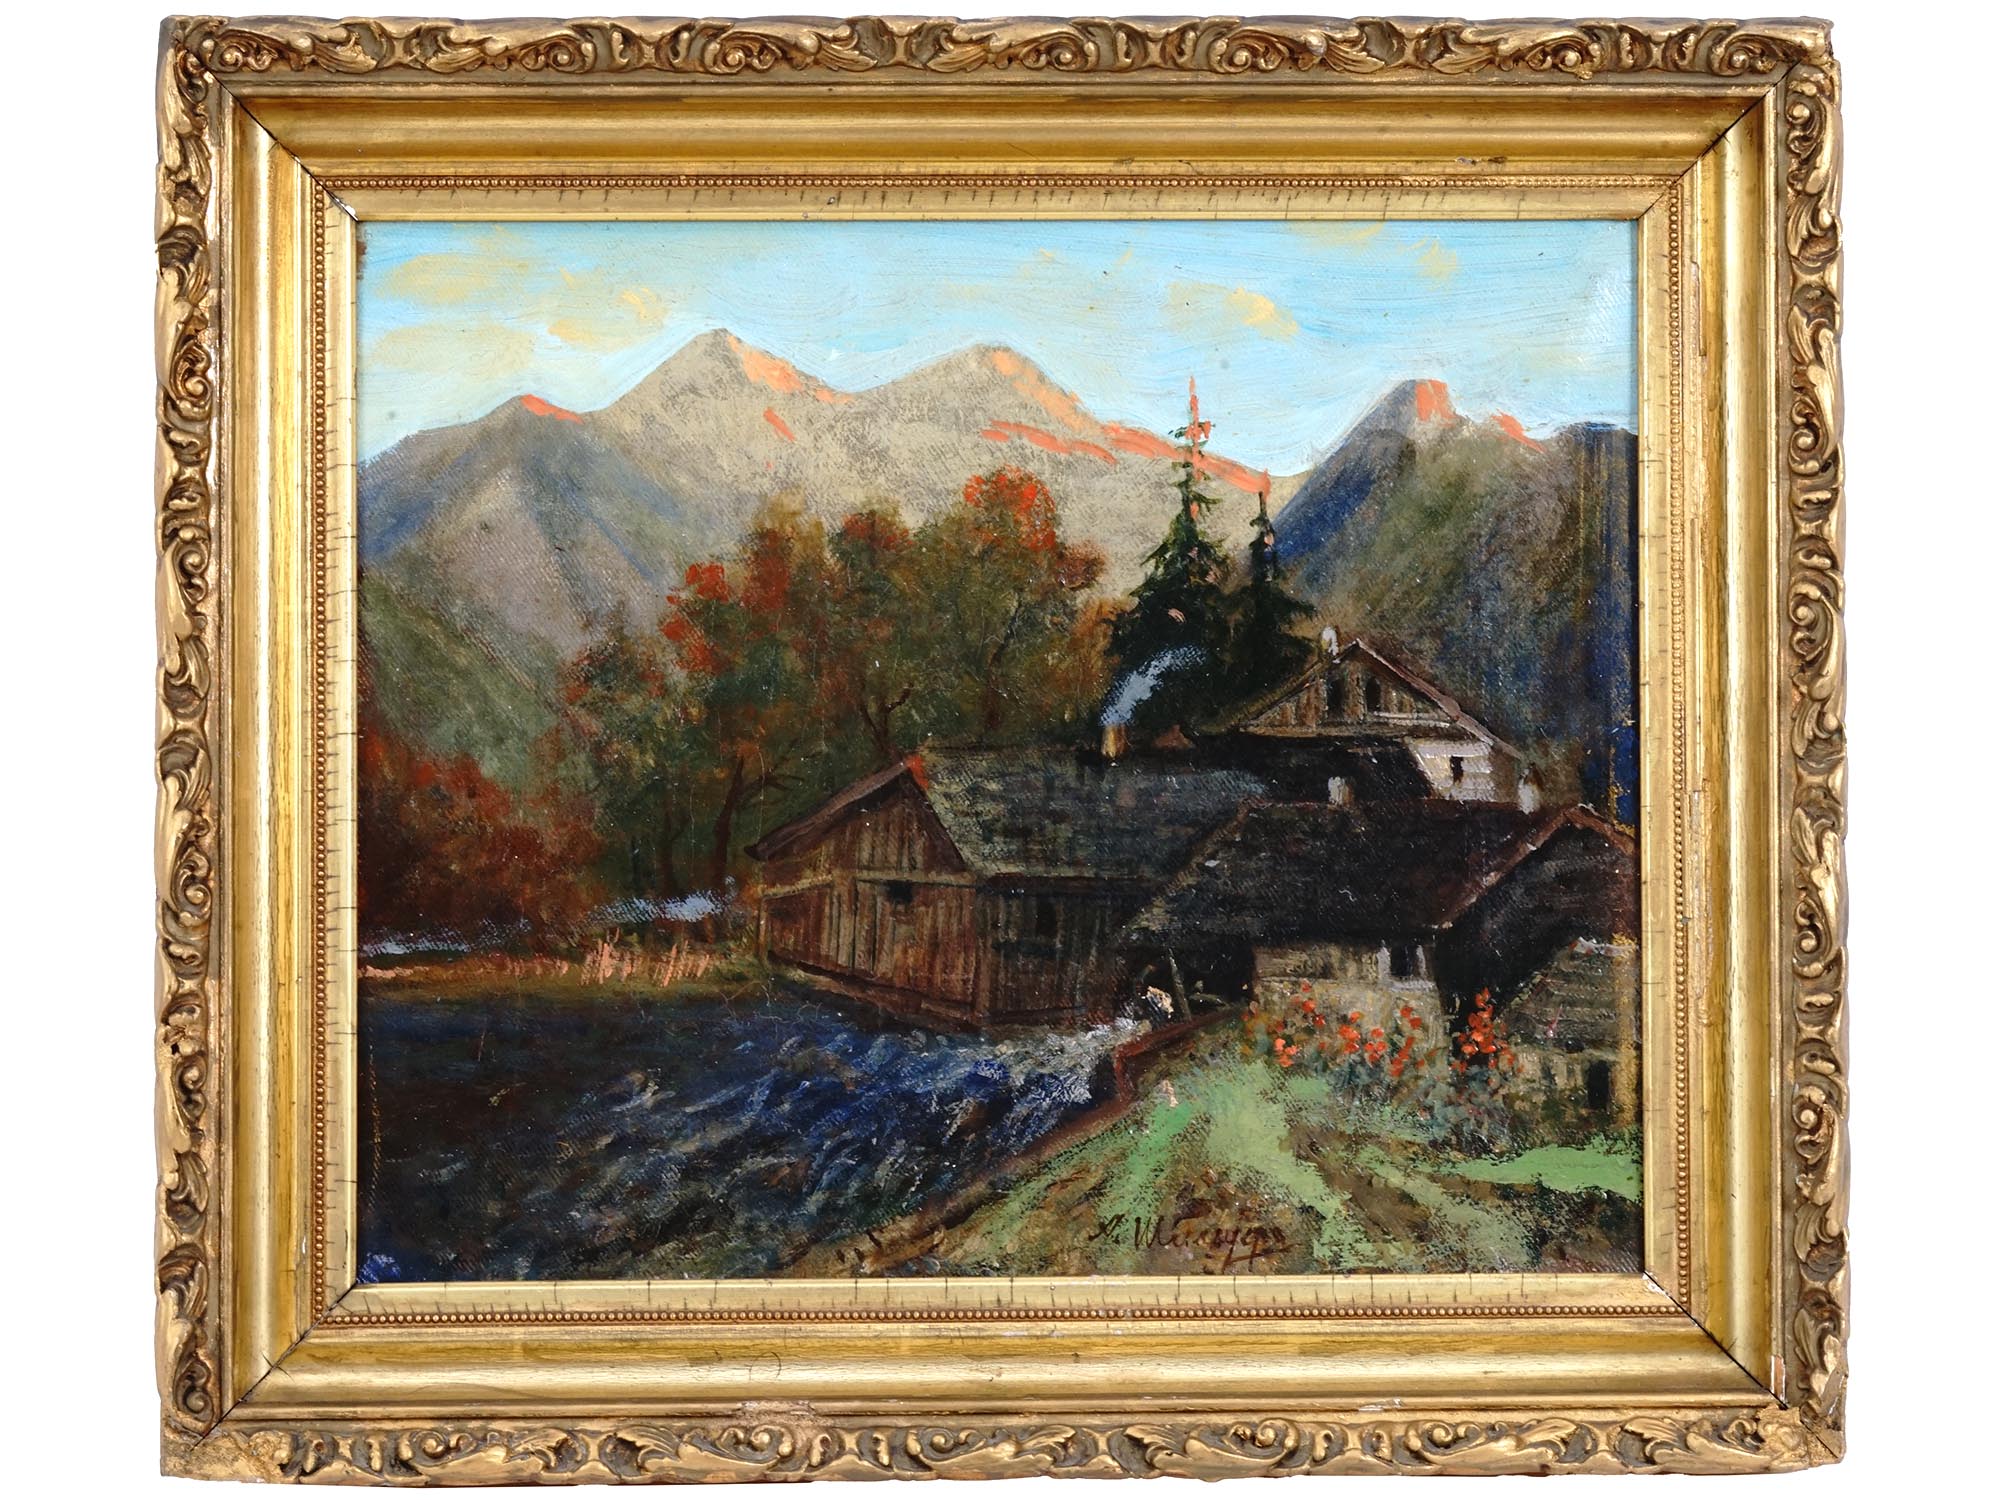 RUSSIAN LANDSCAPE PAINTING BY ANDREI SHILDER PIC-0